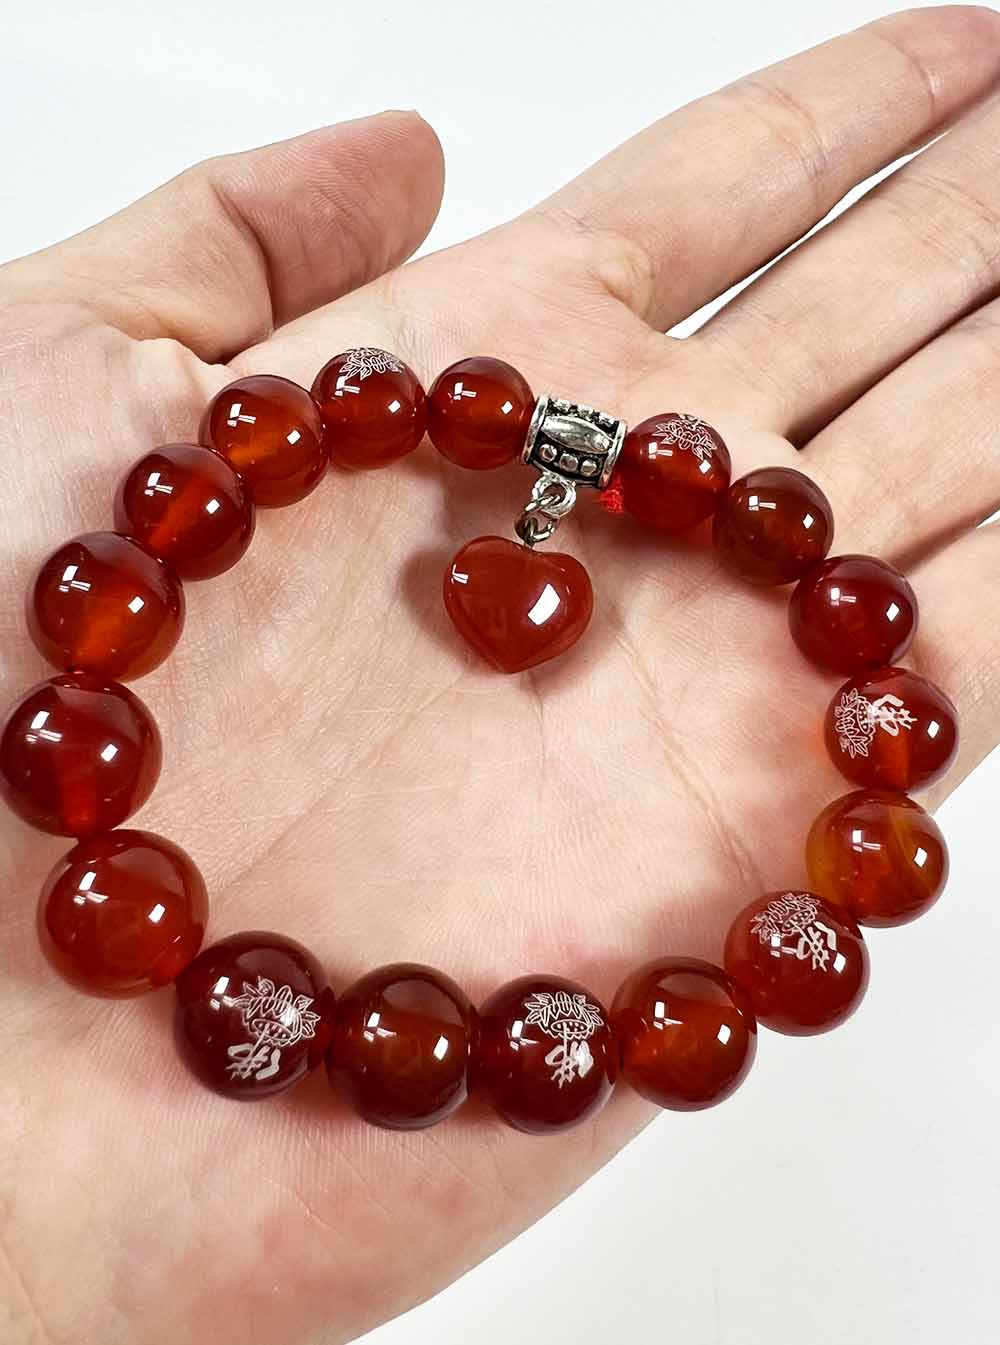 Red Agate Bracelet with Heart Pendant 10mm